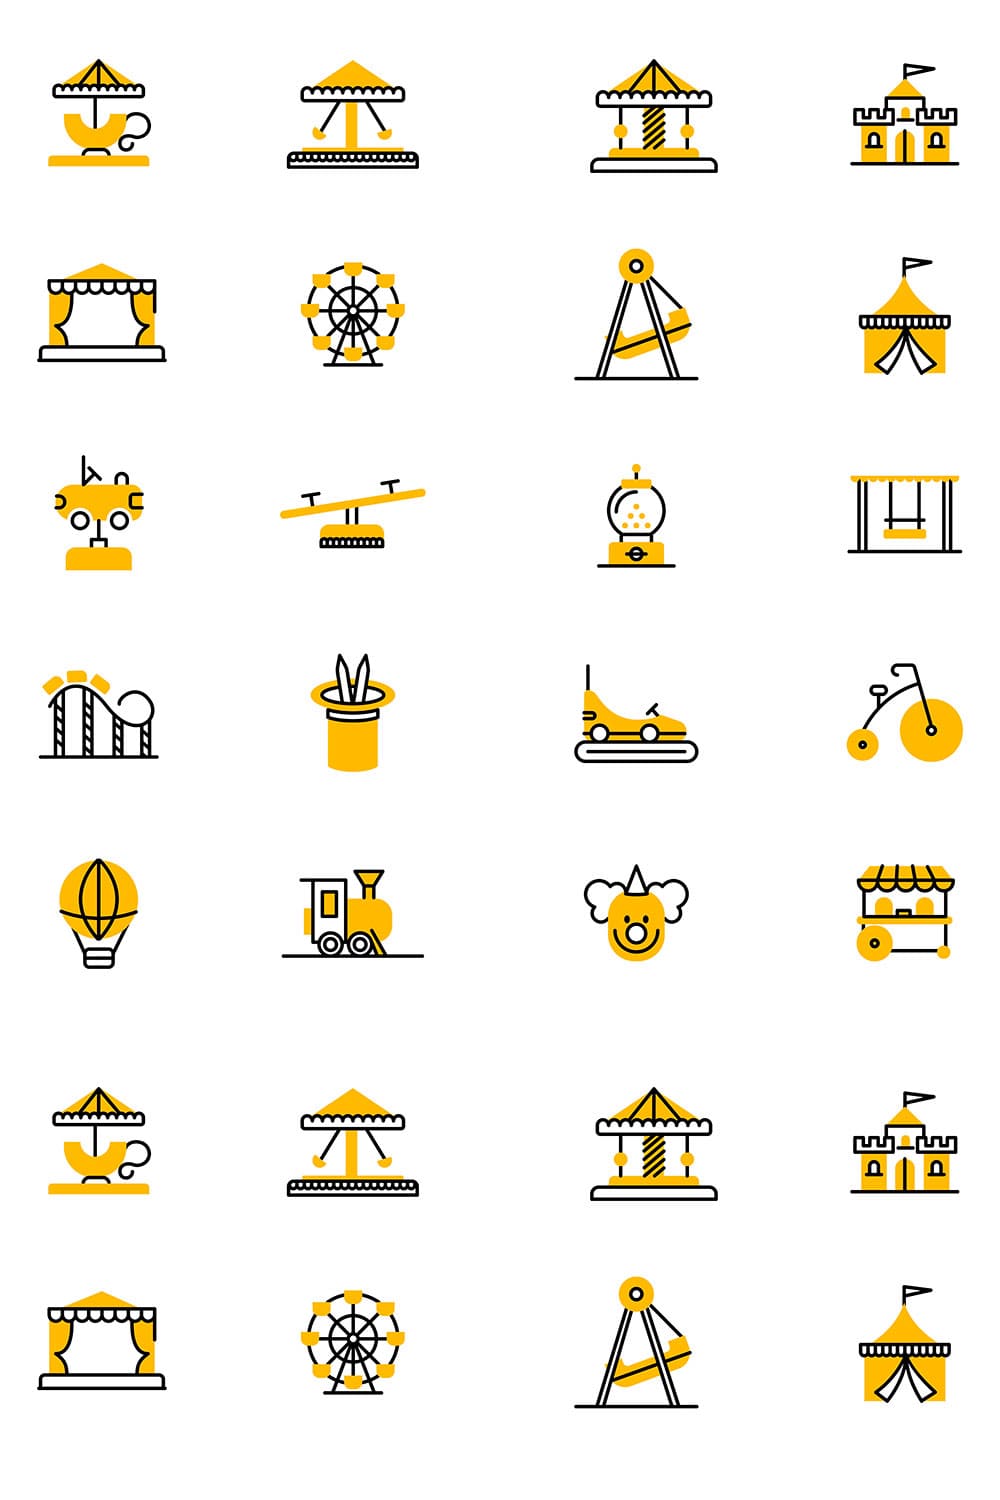 20 amusement circus icons set, picture for pinterest.